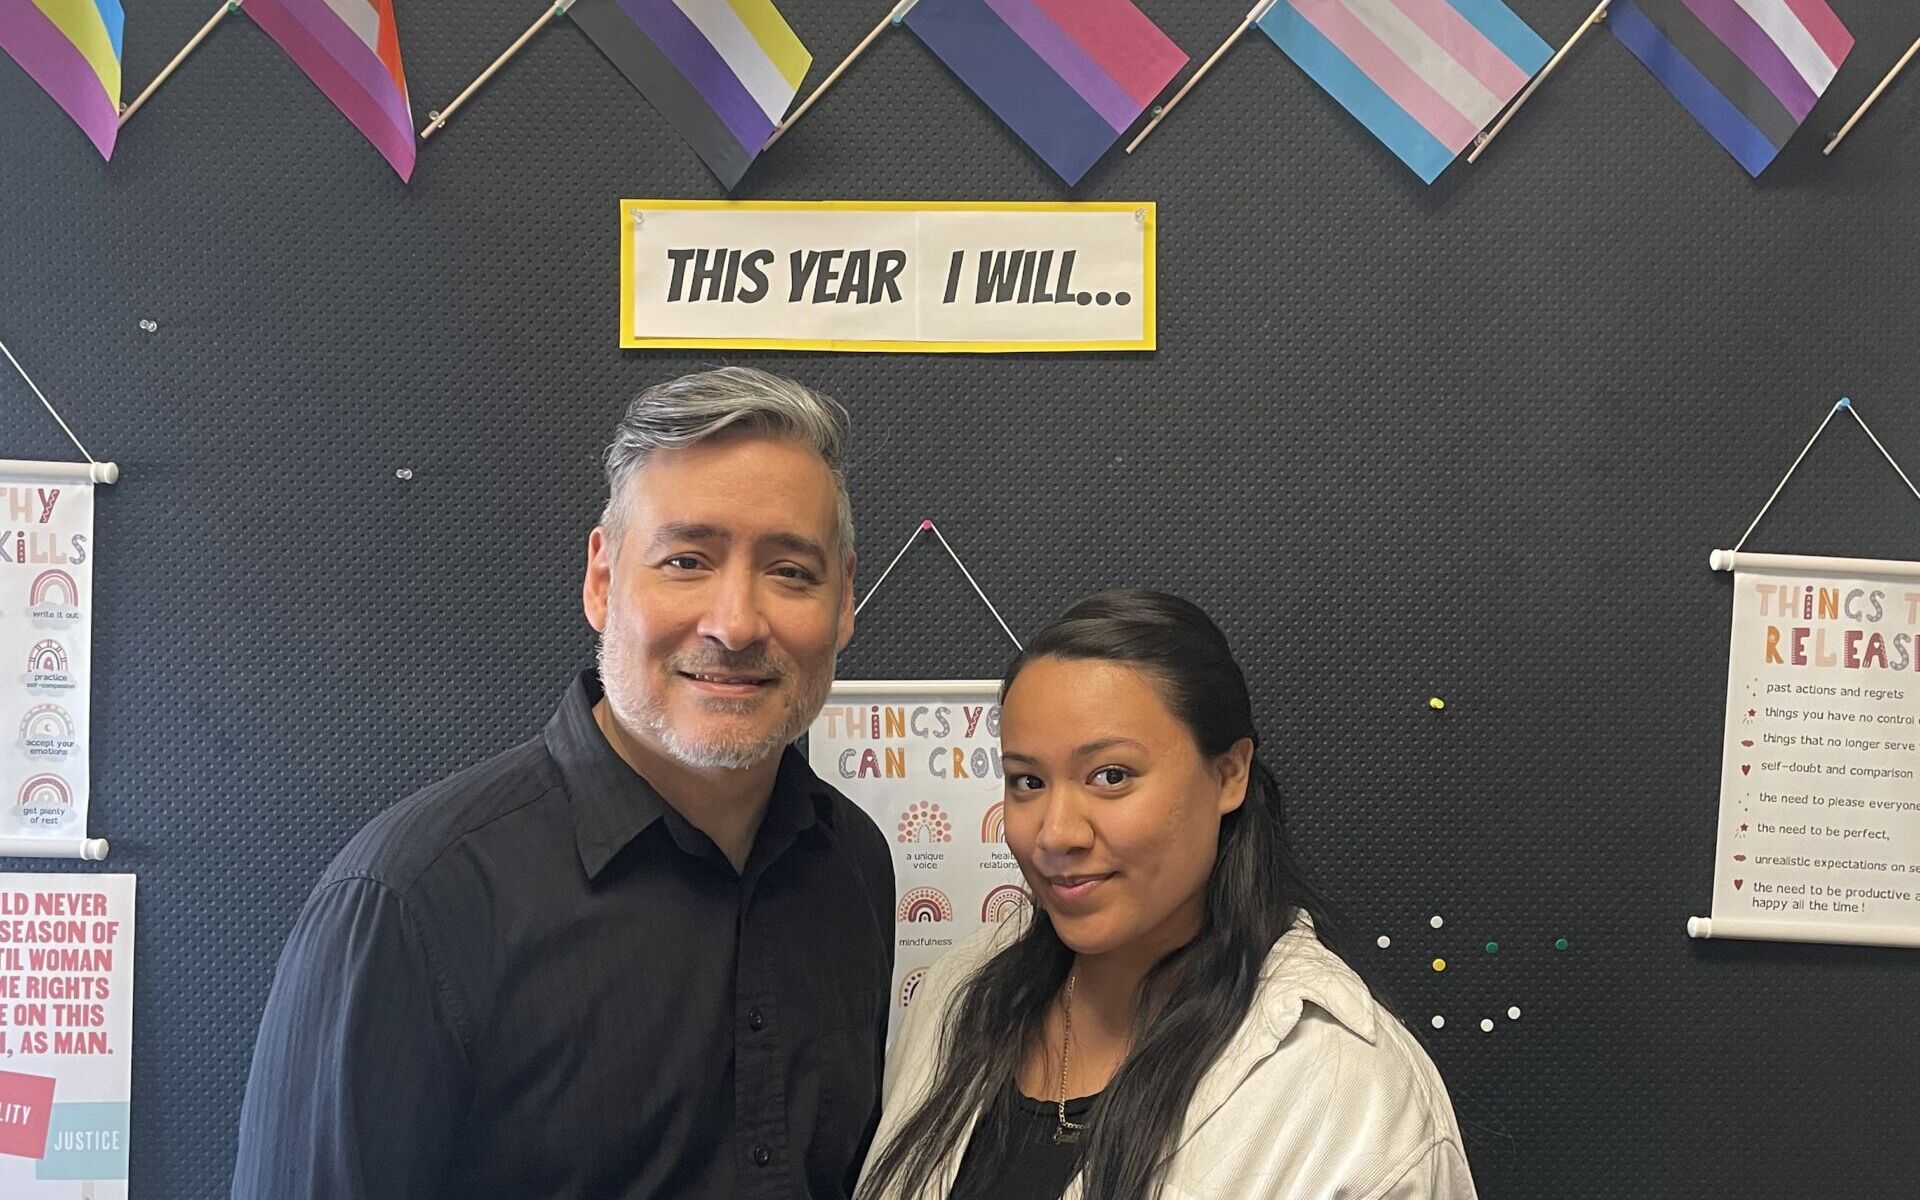 Two teachers pose in front of a black push pin board decorated with Pride flags. On the left is Mr. Sanabria, an older Latine man with light brown skin and short gray hair. He is wearing a long-sleeve black button-up and gray pants. On the right is Ms. Huerta, a young Latine women with light brown skin and long dark brown straight hair. She is wearing a white jacket over a black shirt and black pants. These two teachers run the Pride and Ally Club at ITW David Speer Academy in Chicago, IL.